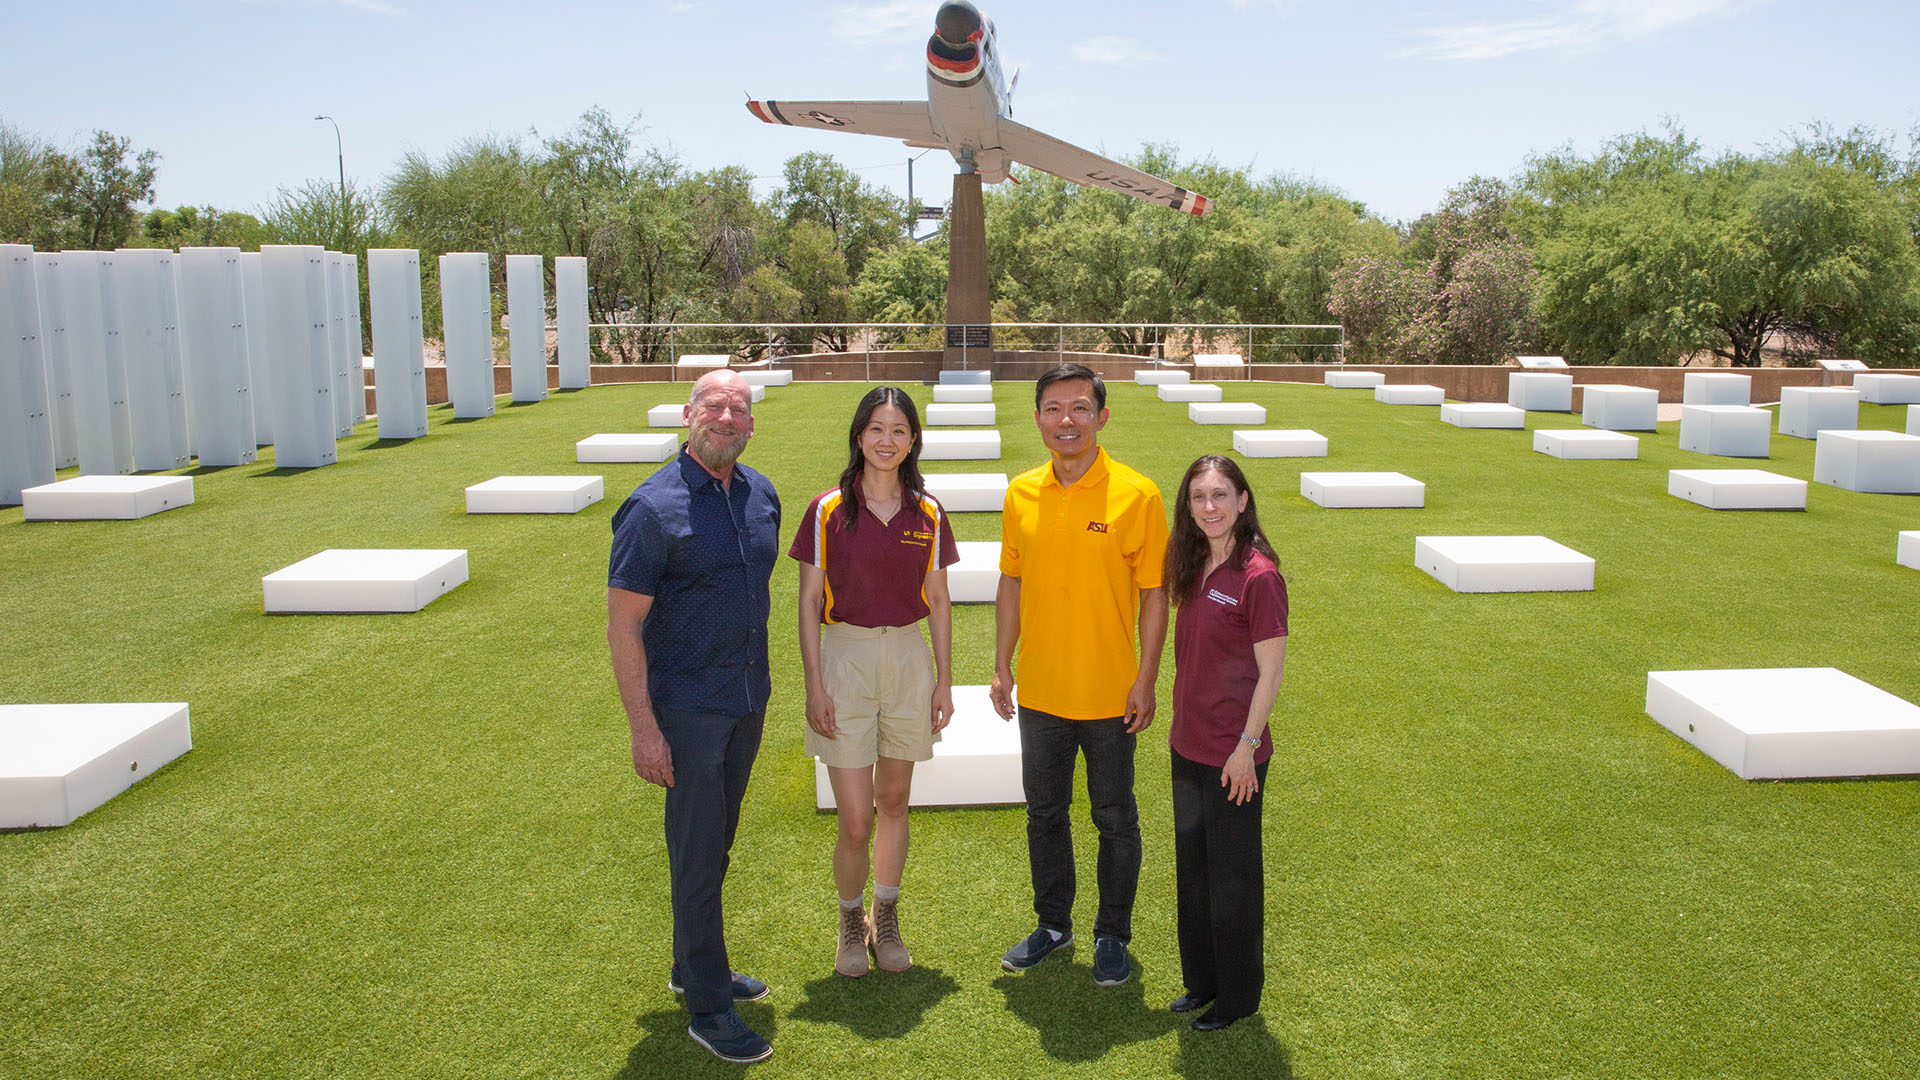 Four researchers stand together on bright green turf under the bright Arizona Sun among a field of white boxes that are arranged at even intervals on the turf.